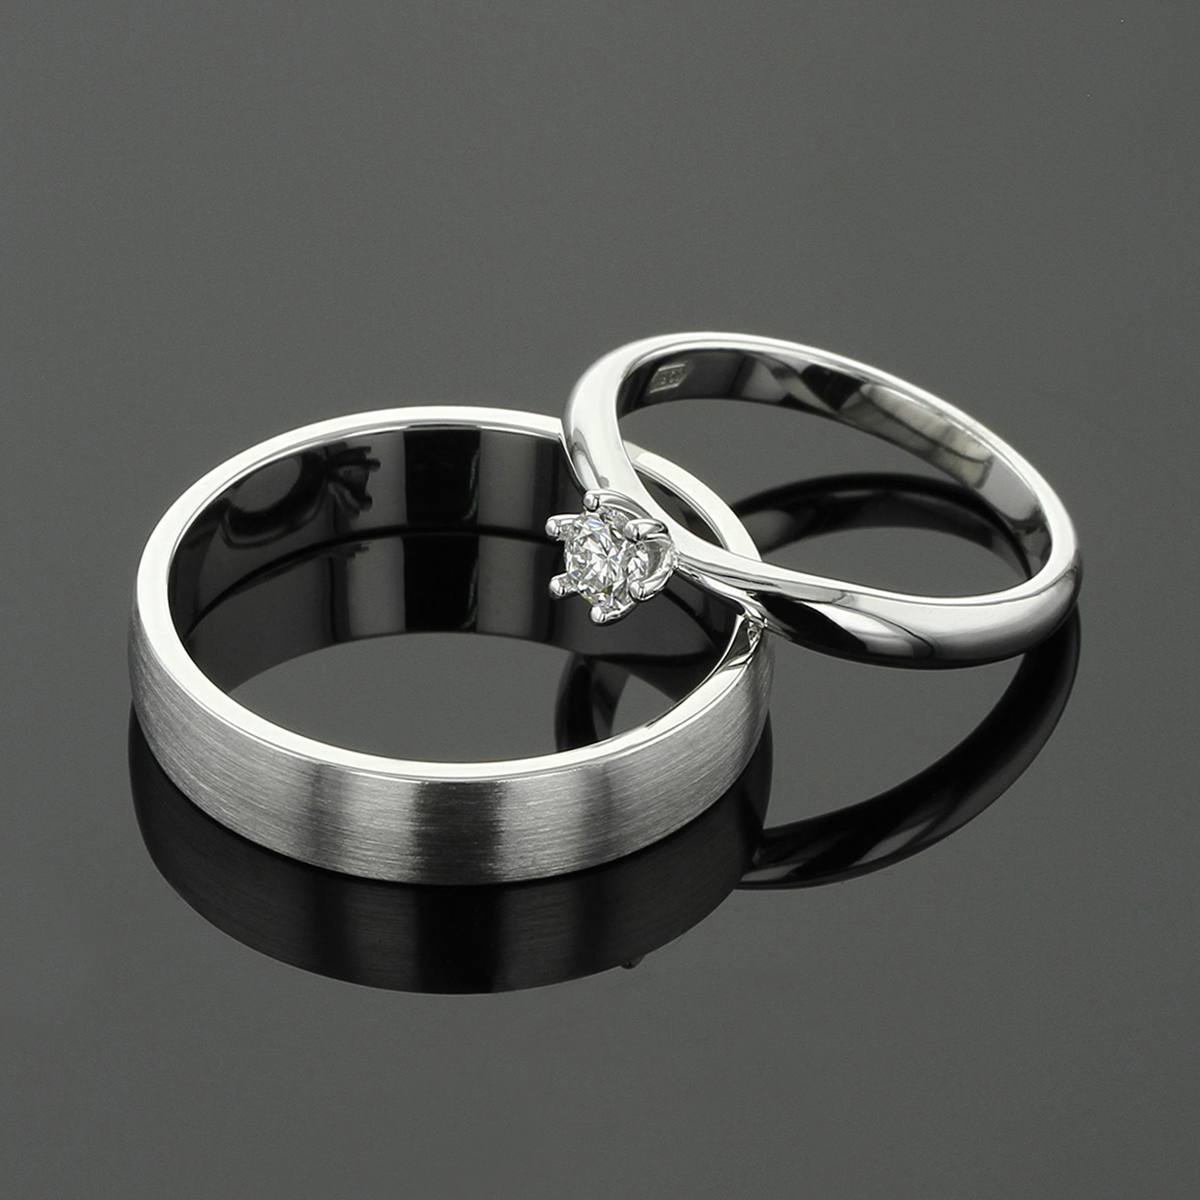 Simple, matted wedding band in white gold for him with a classic, solitaire diamond ring in polished white gold for her.